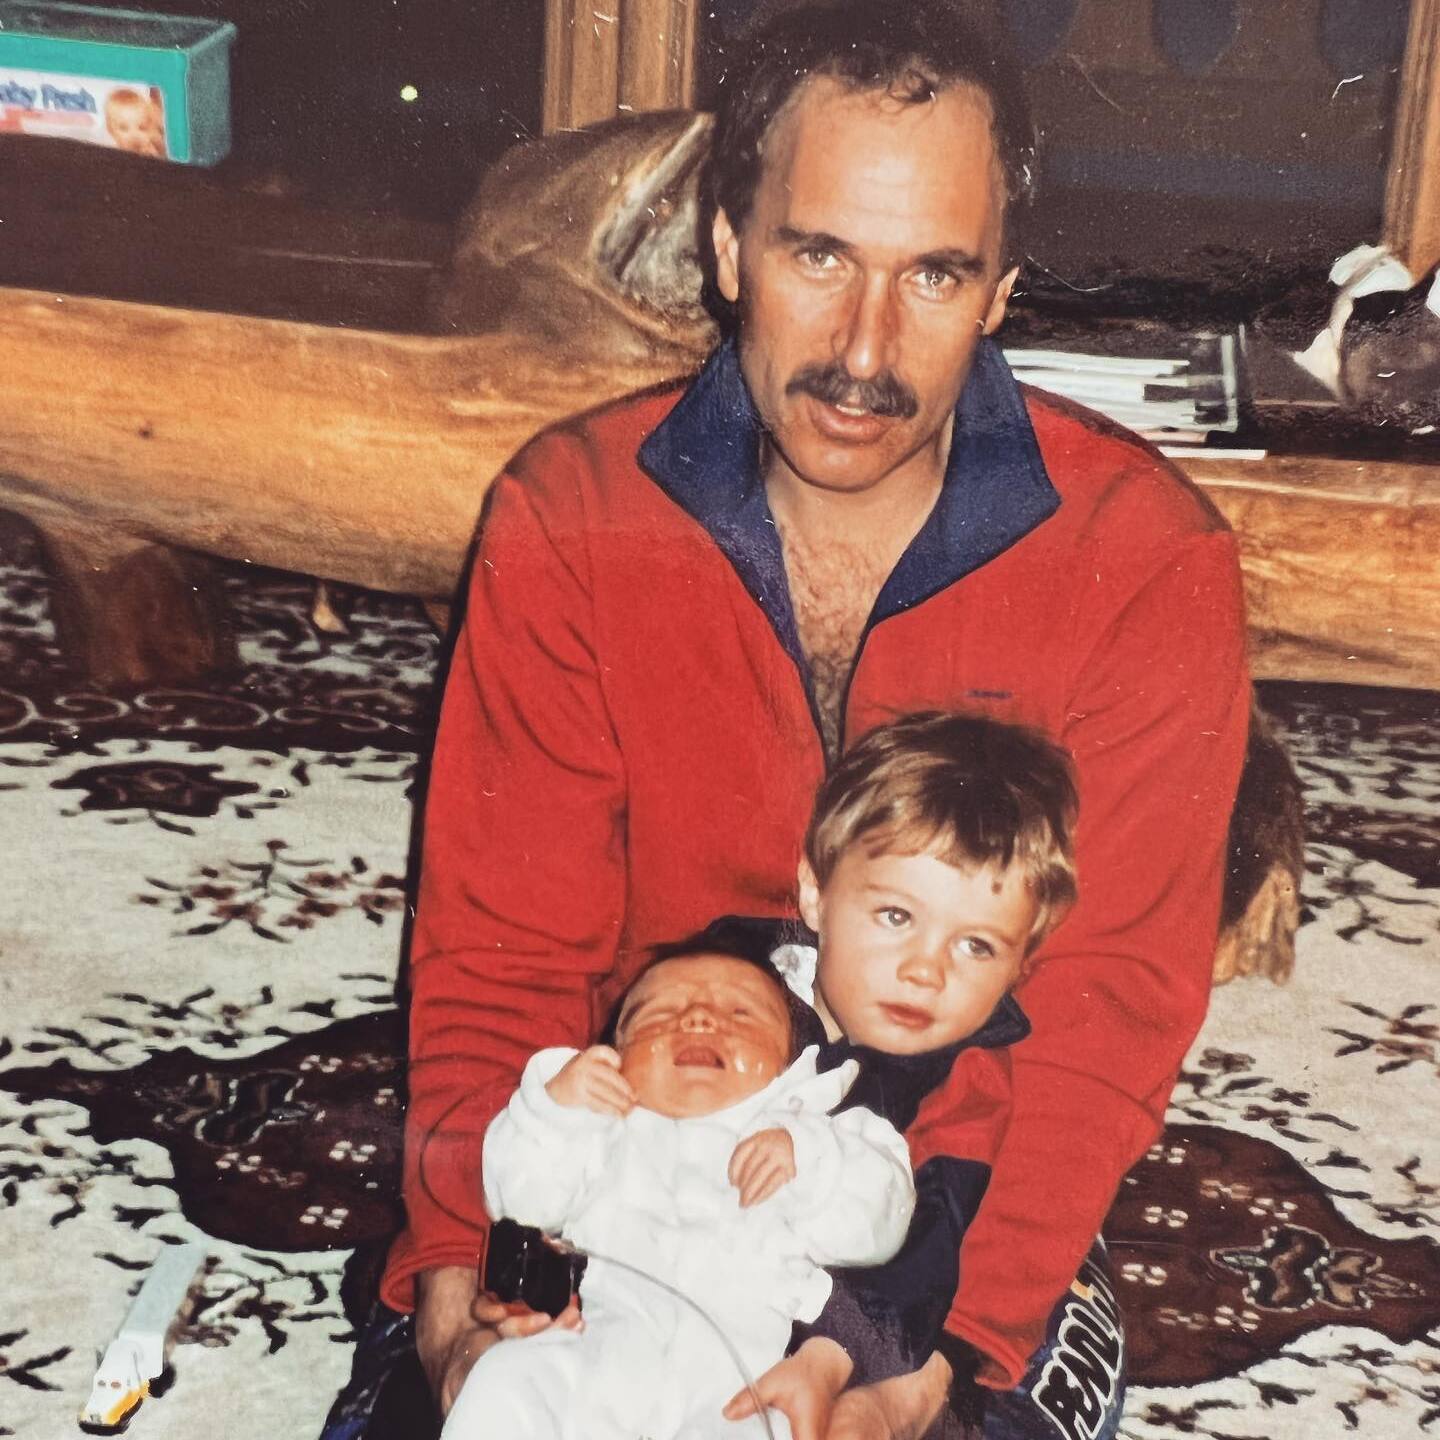 Young Mikaela Shiffrin with her brother and father